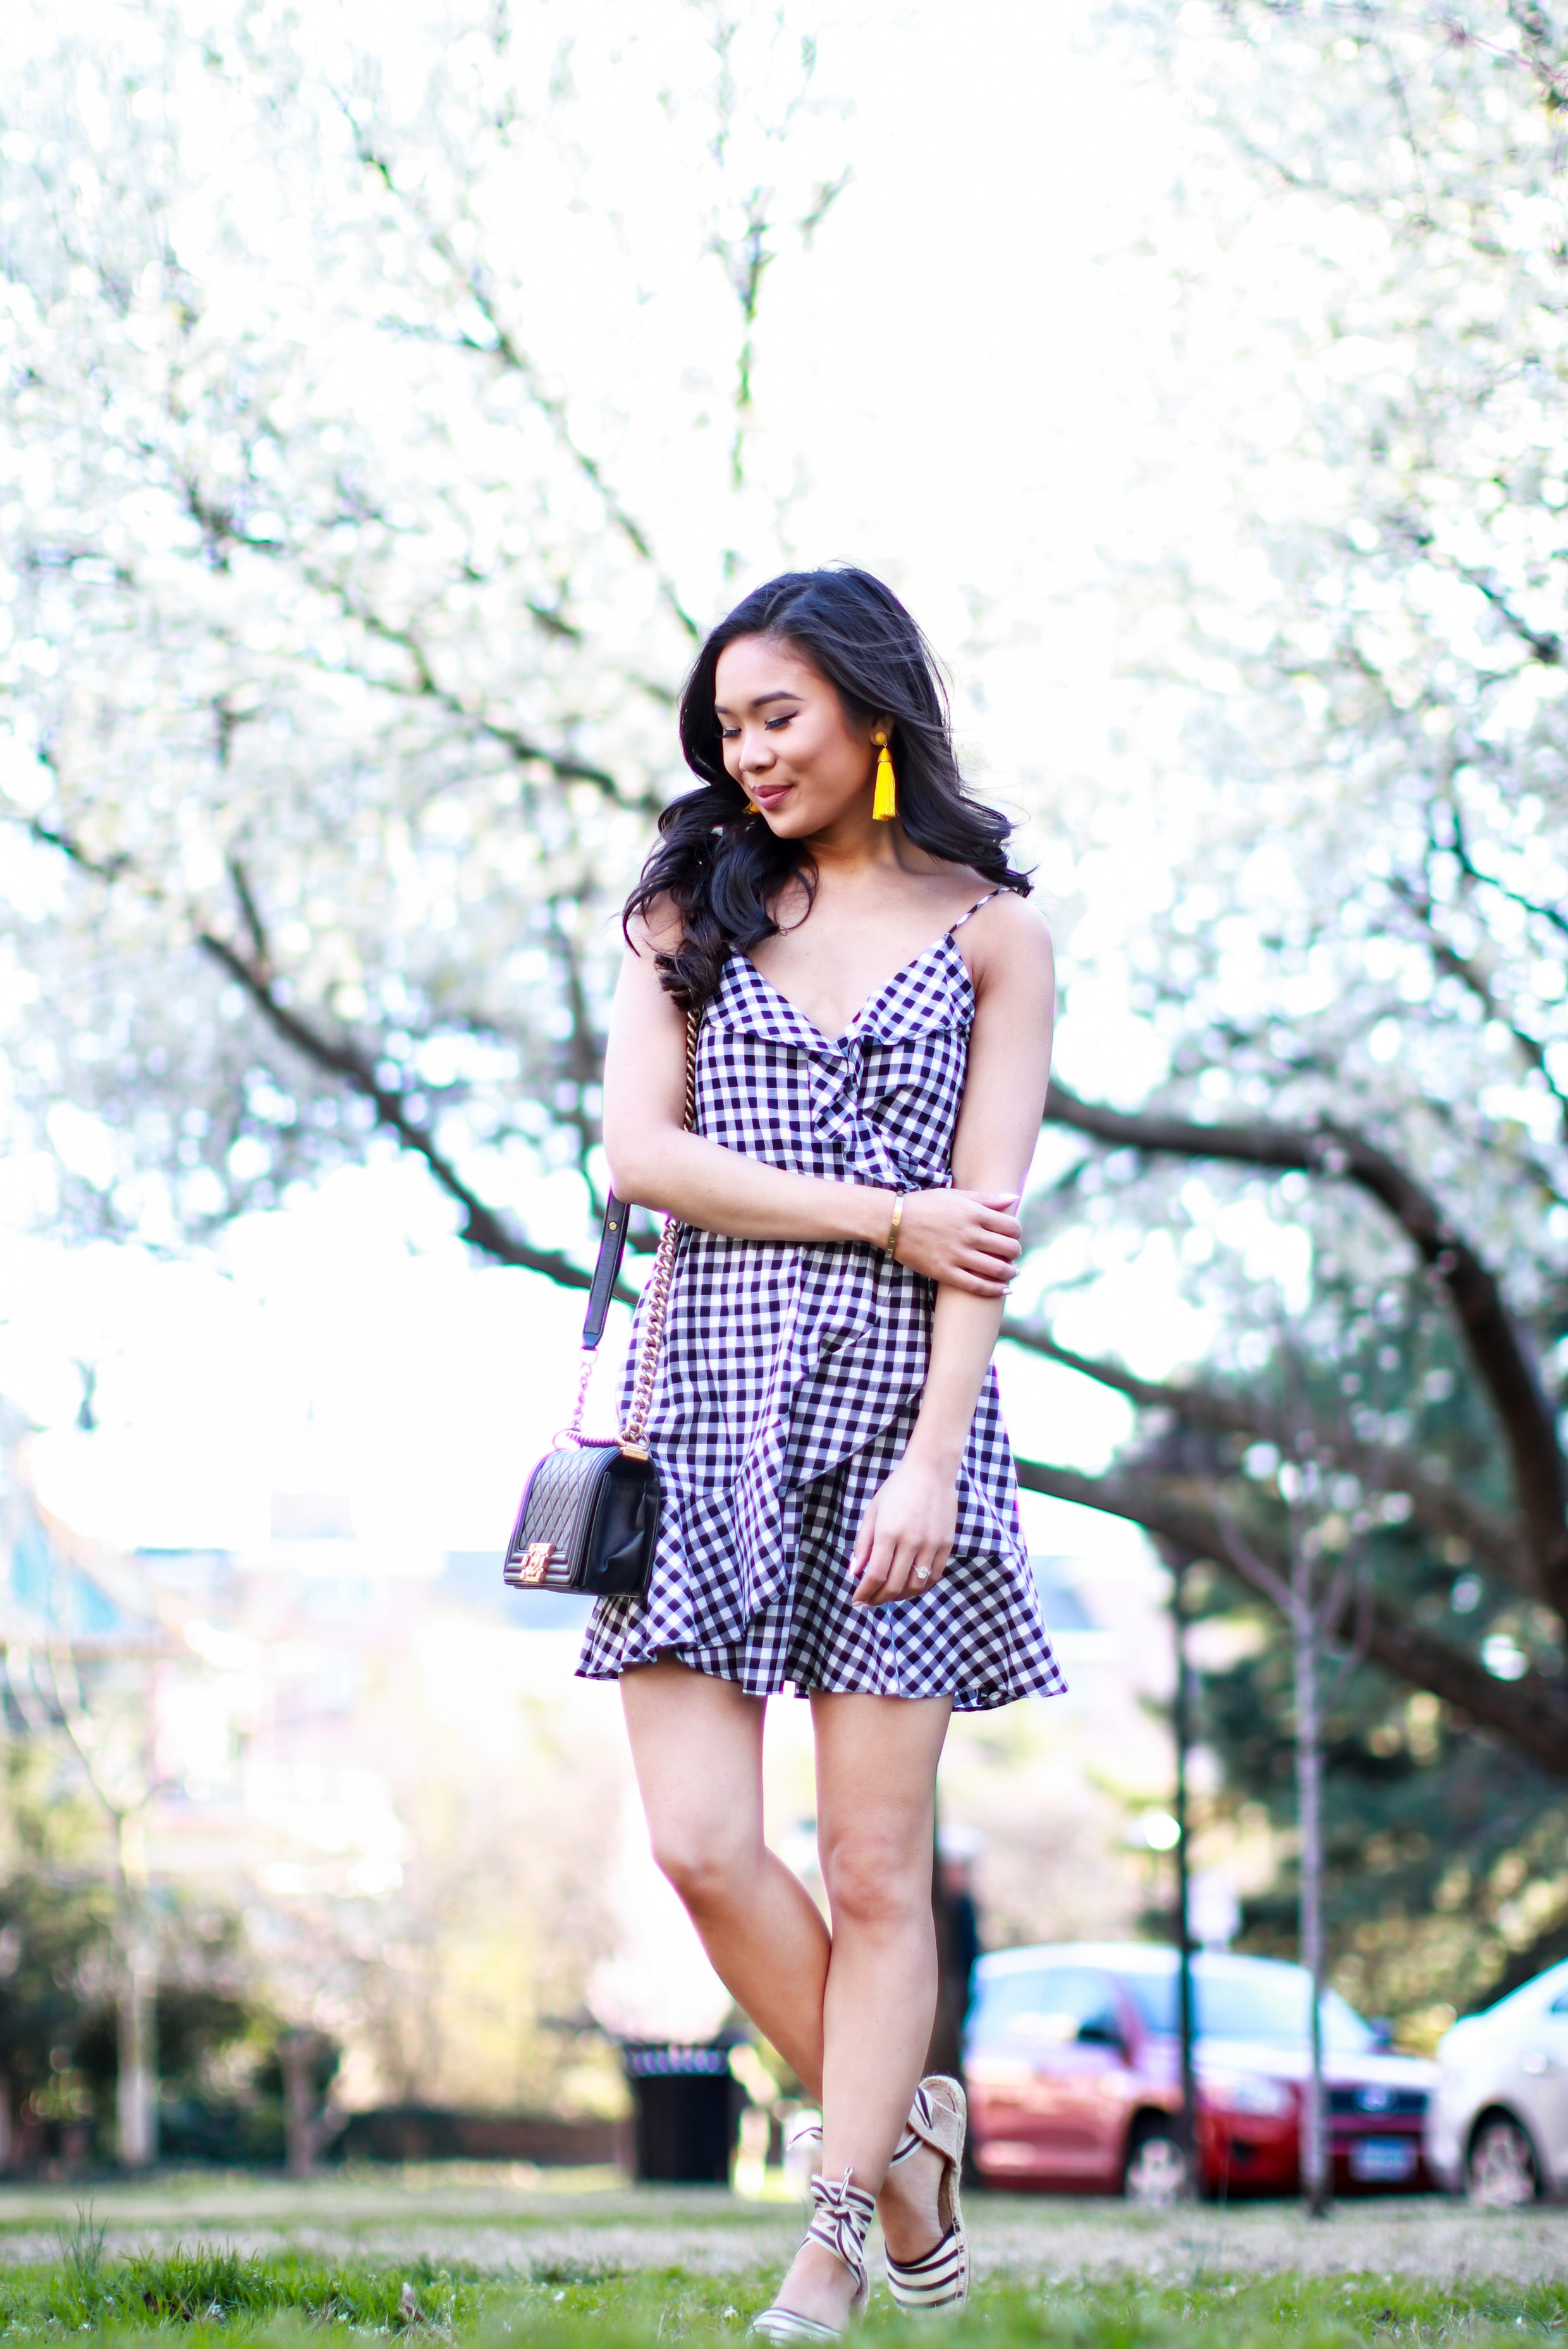 Black and white gingham dress with striped espadrilles